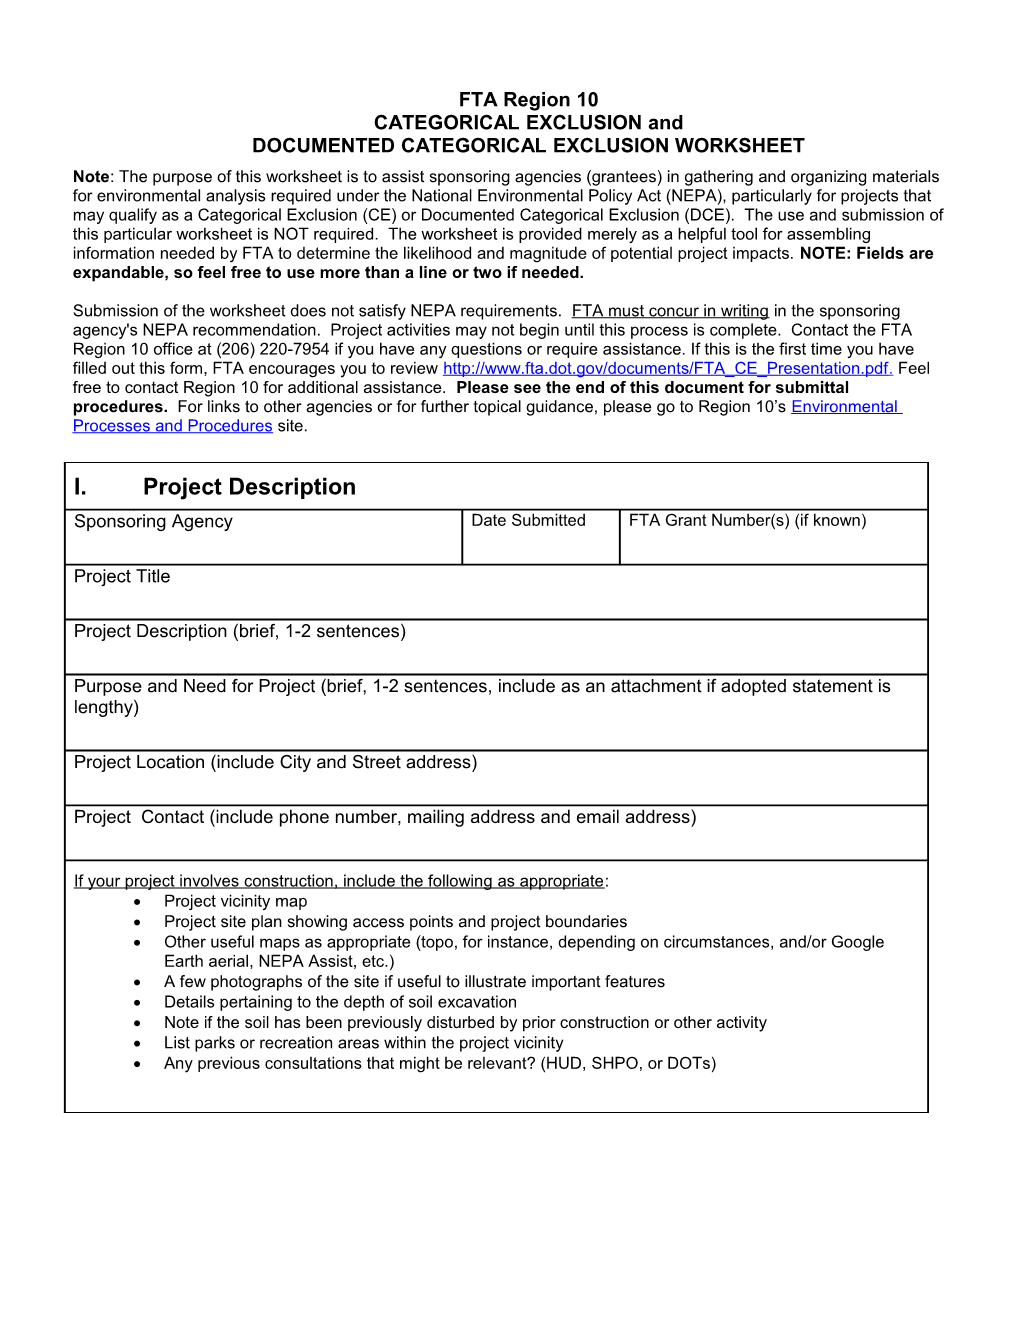 Documented Categorical Exclusion Worksheet s1